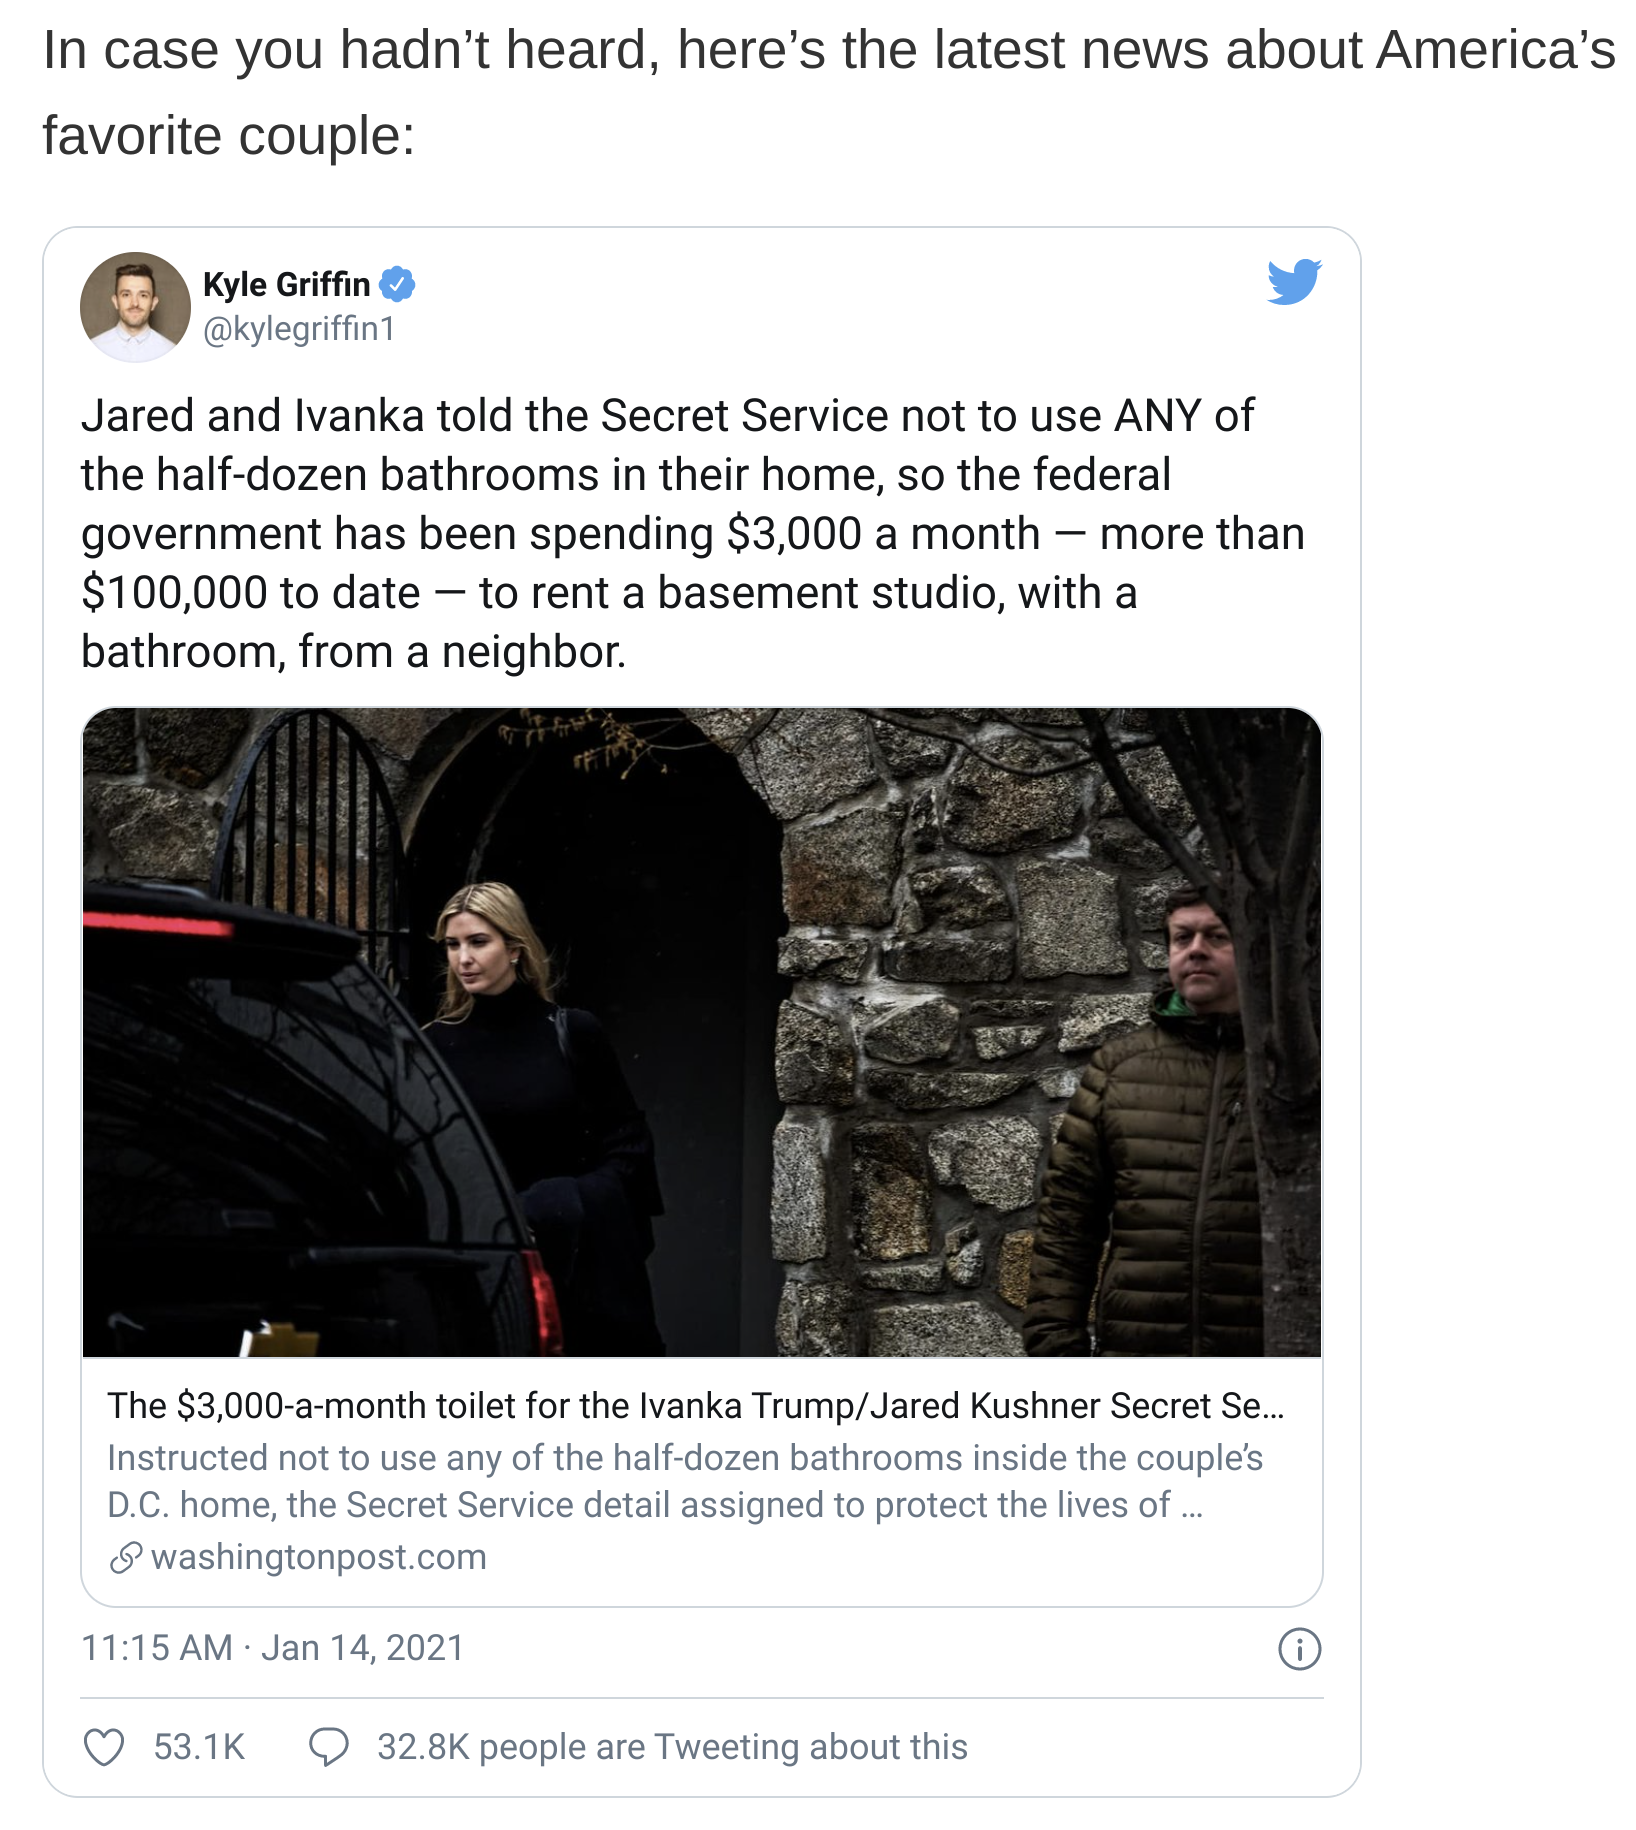 media - In case you hadn't heard, here's the latest news about America's favorite couple Kyle Griffin Jared and Ivanka told the Secret Service not to use Any of the halfdozen bathrooms in their home, so the federal government has been spending $3,000 a mo